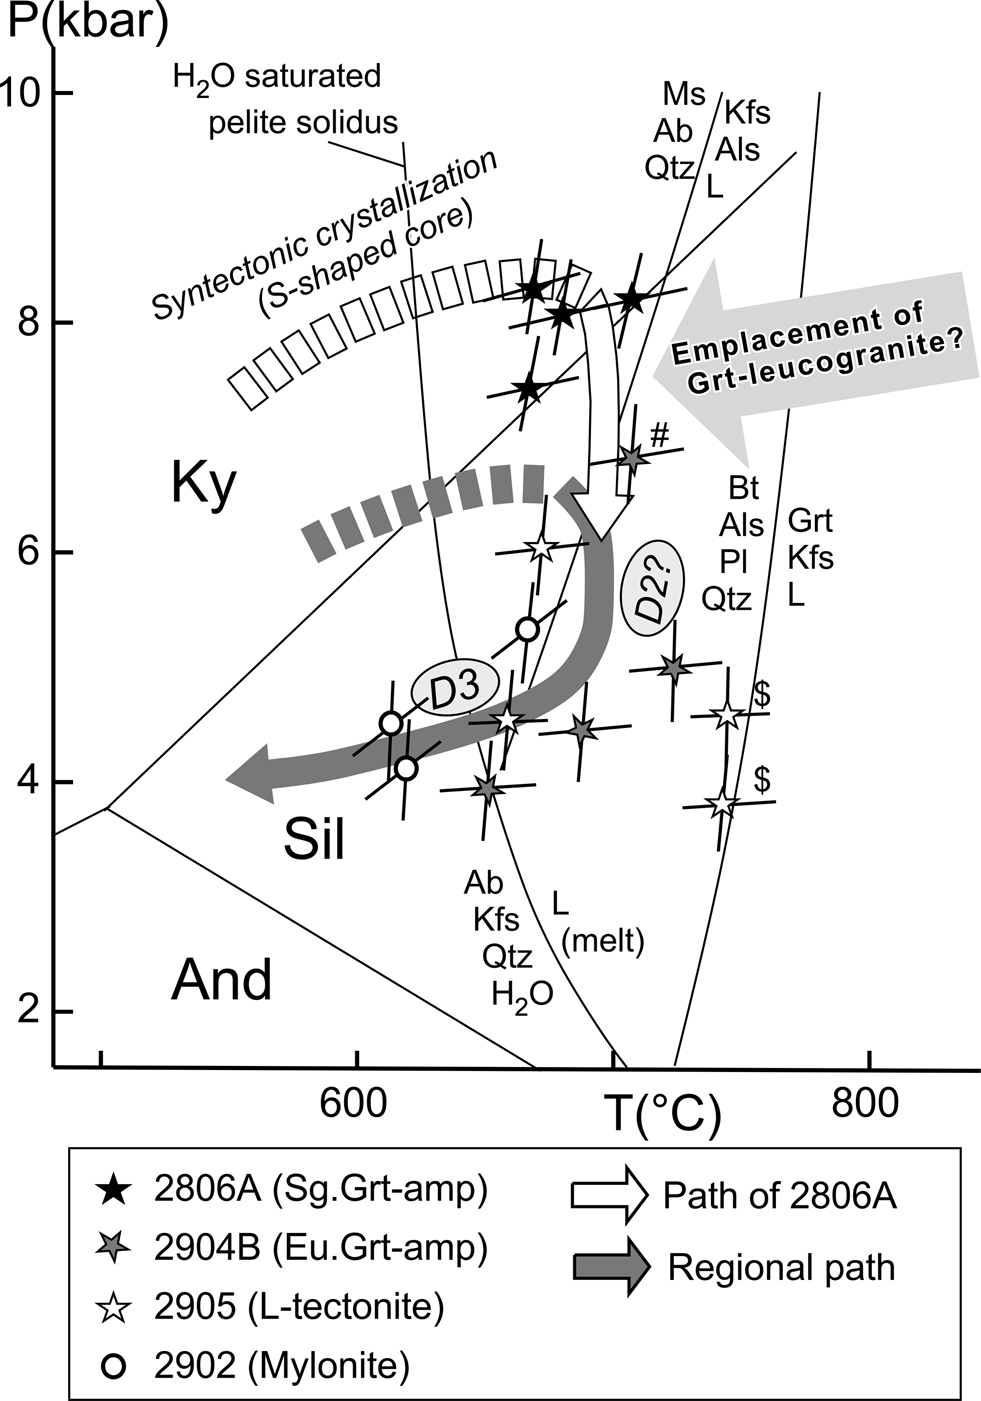 Tectono Metamorphic Evolution And Significance Of Shear Zone Lithologies In Akebono Rock Lutzow Holm Complex East Antarctica Antarctic Science Cambridge Core